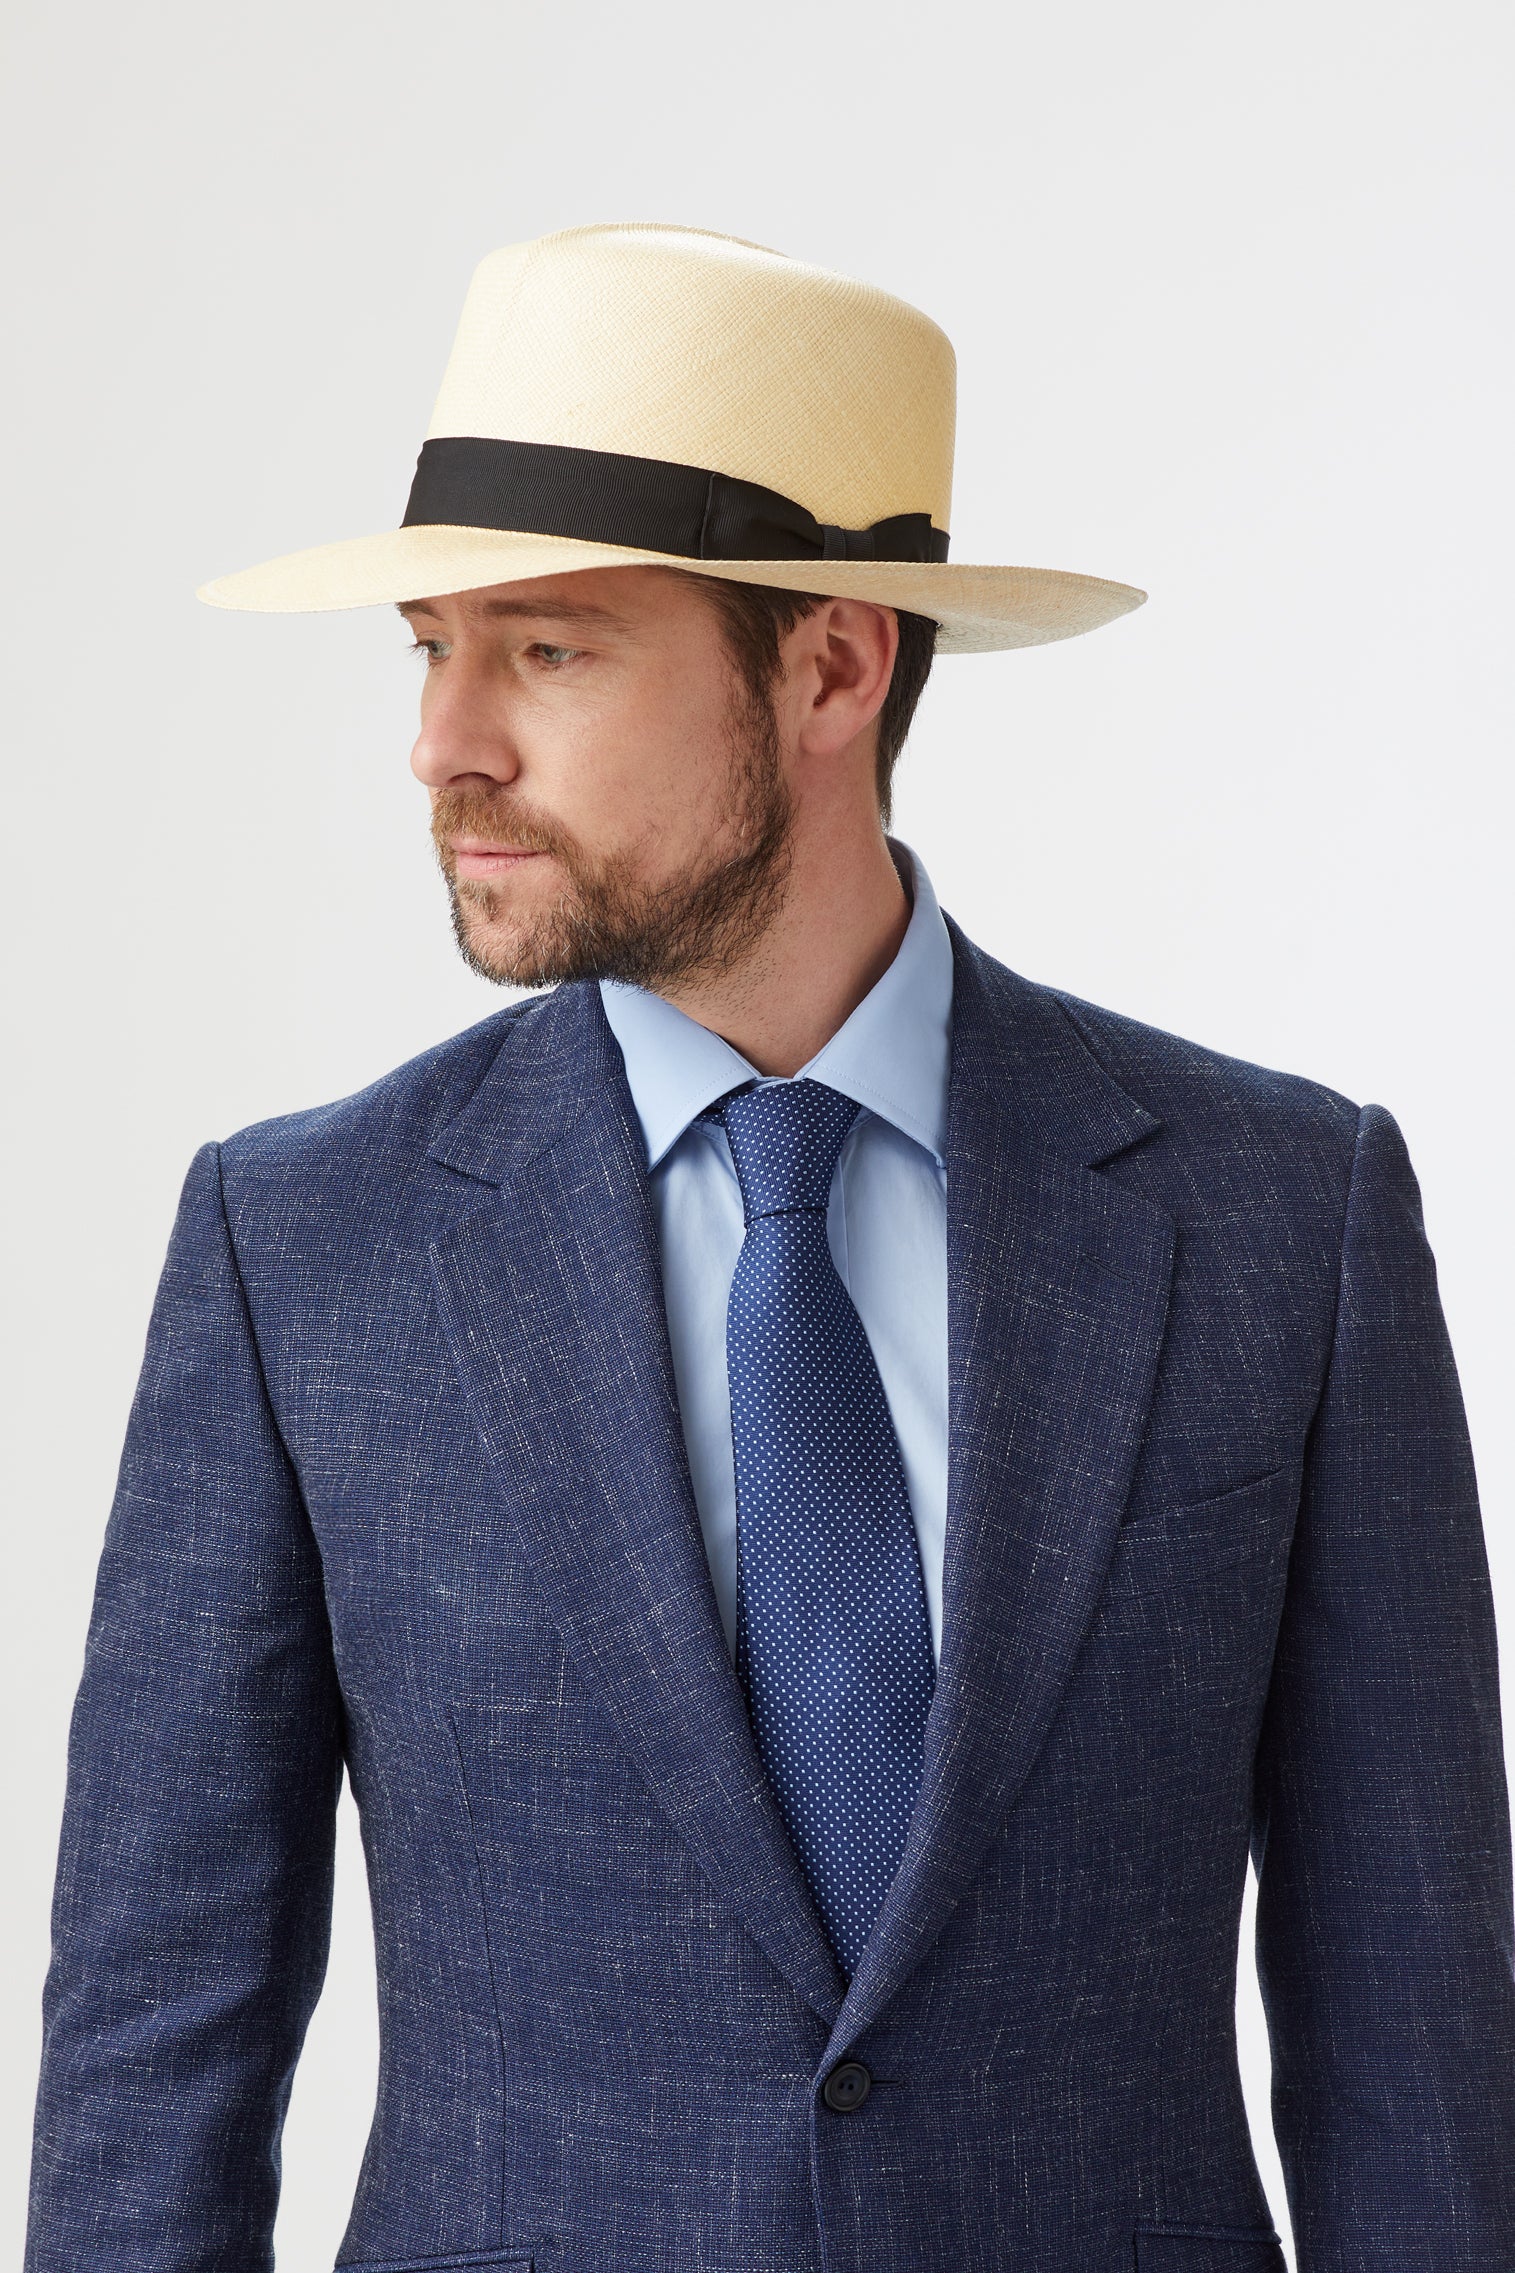 Men's Rollable Panama - Products - Lock & Co. Hatters London UK